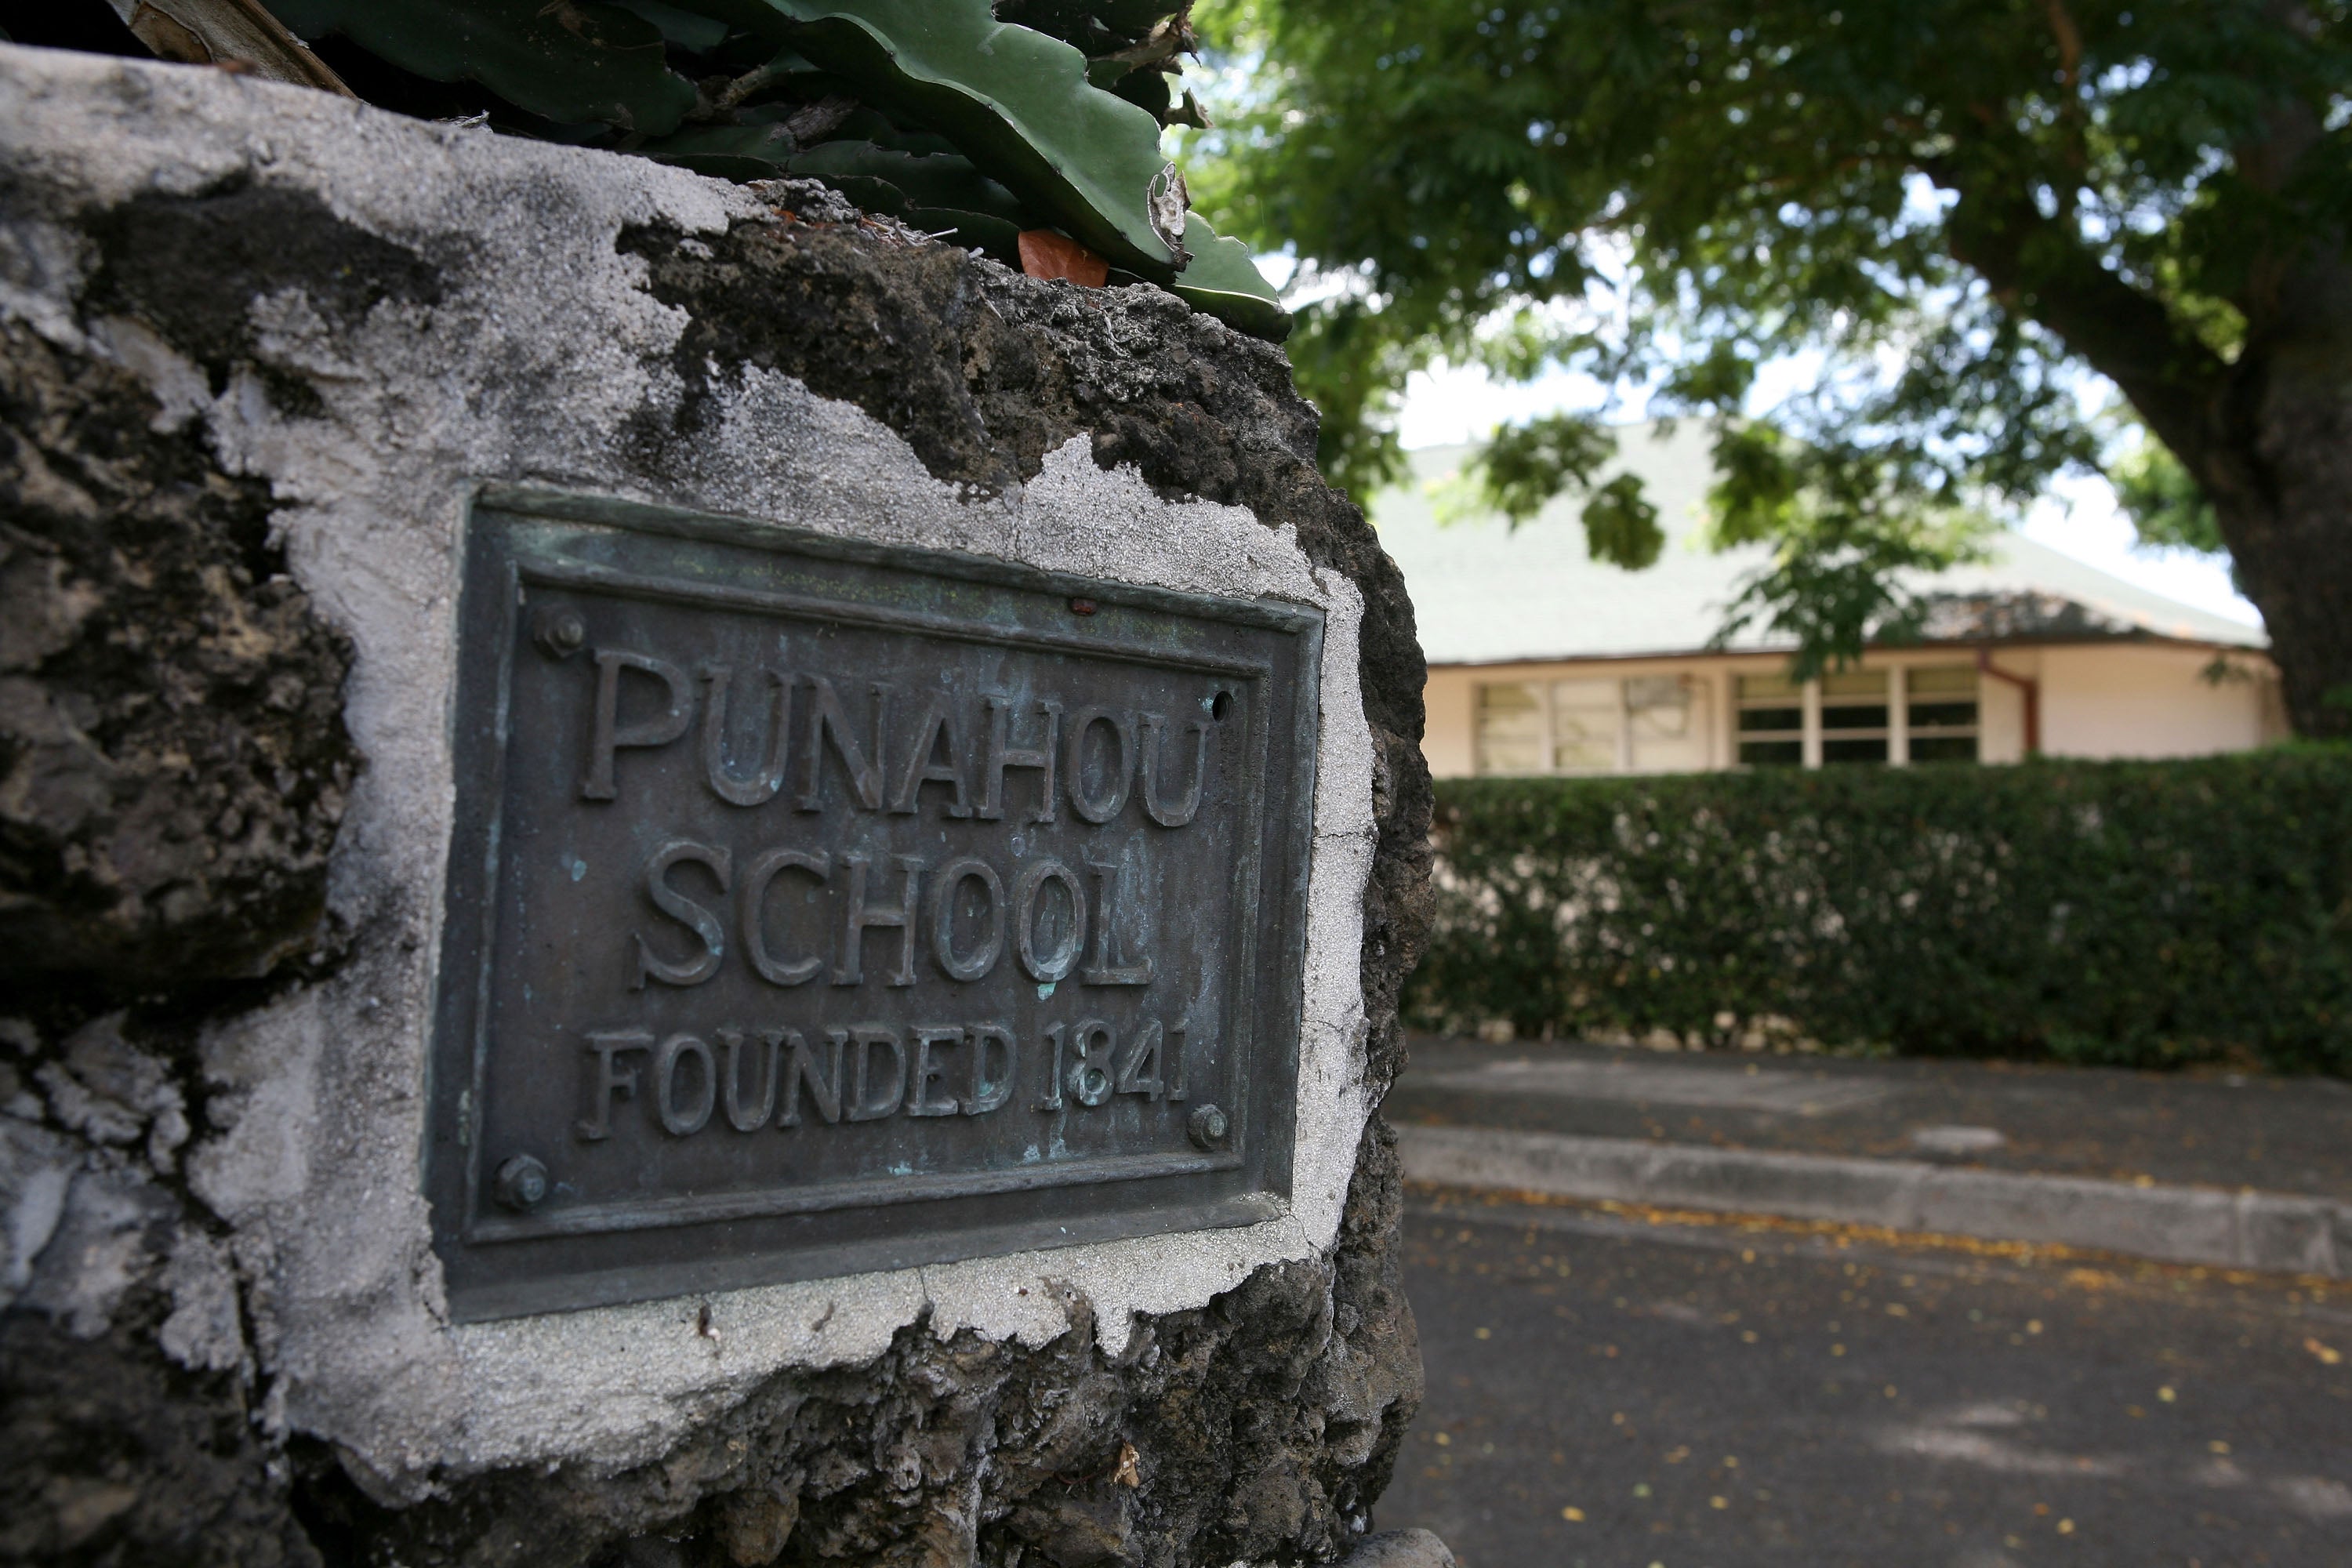 The Punahou School that presidential candidate Barack Obama attended as a teenager is shown October 22, 2008 in Honolulu, Hawaii.